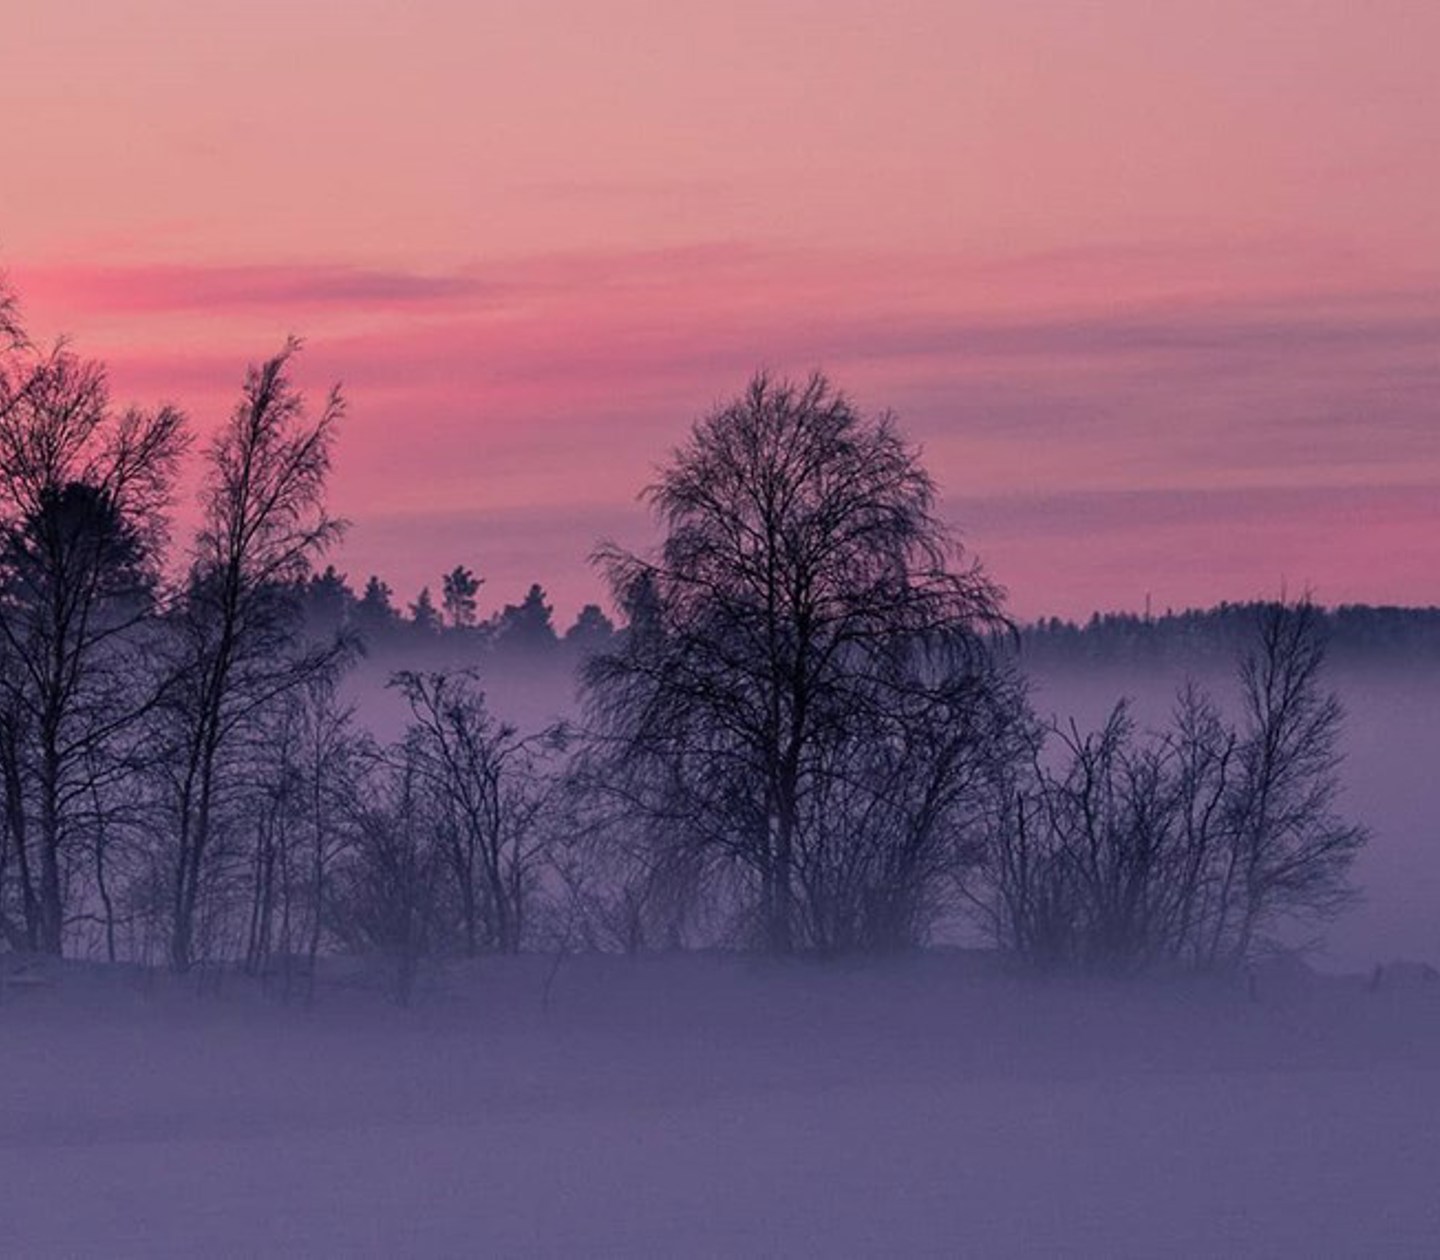 Foggy winter landscape with a pink sunset